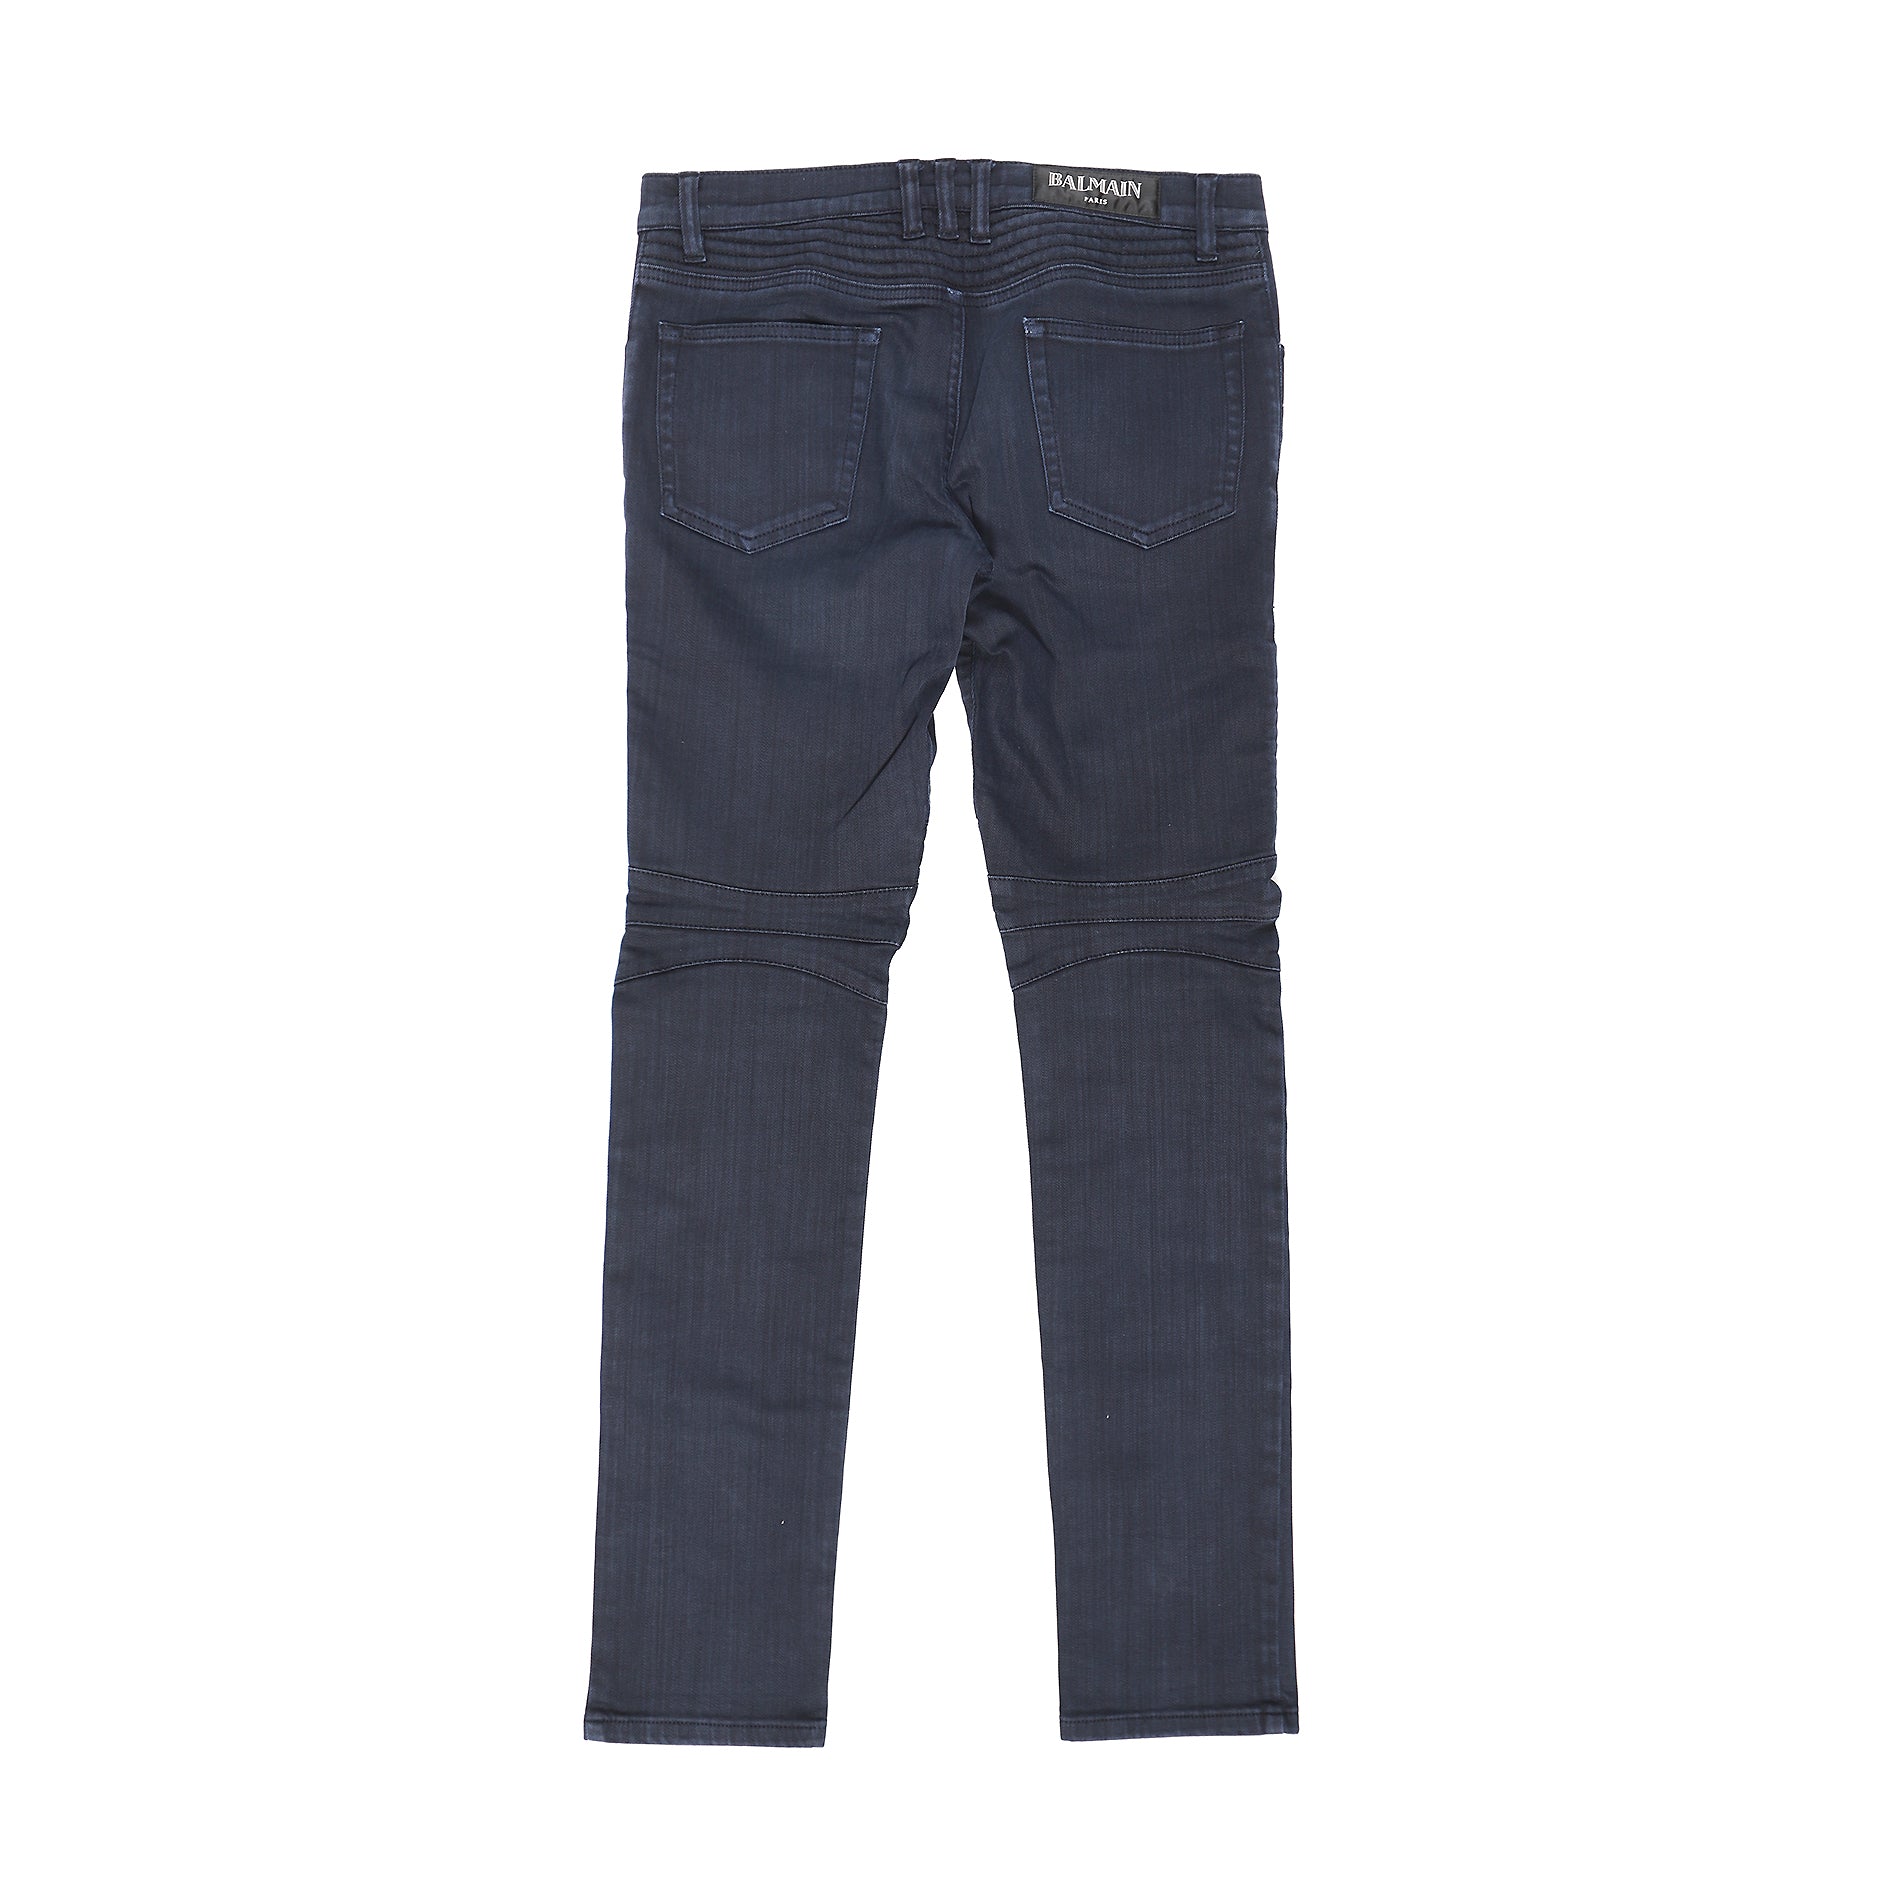 Men's Balmain Jeans Sale | Up to 70% Off | THE OUTNET